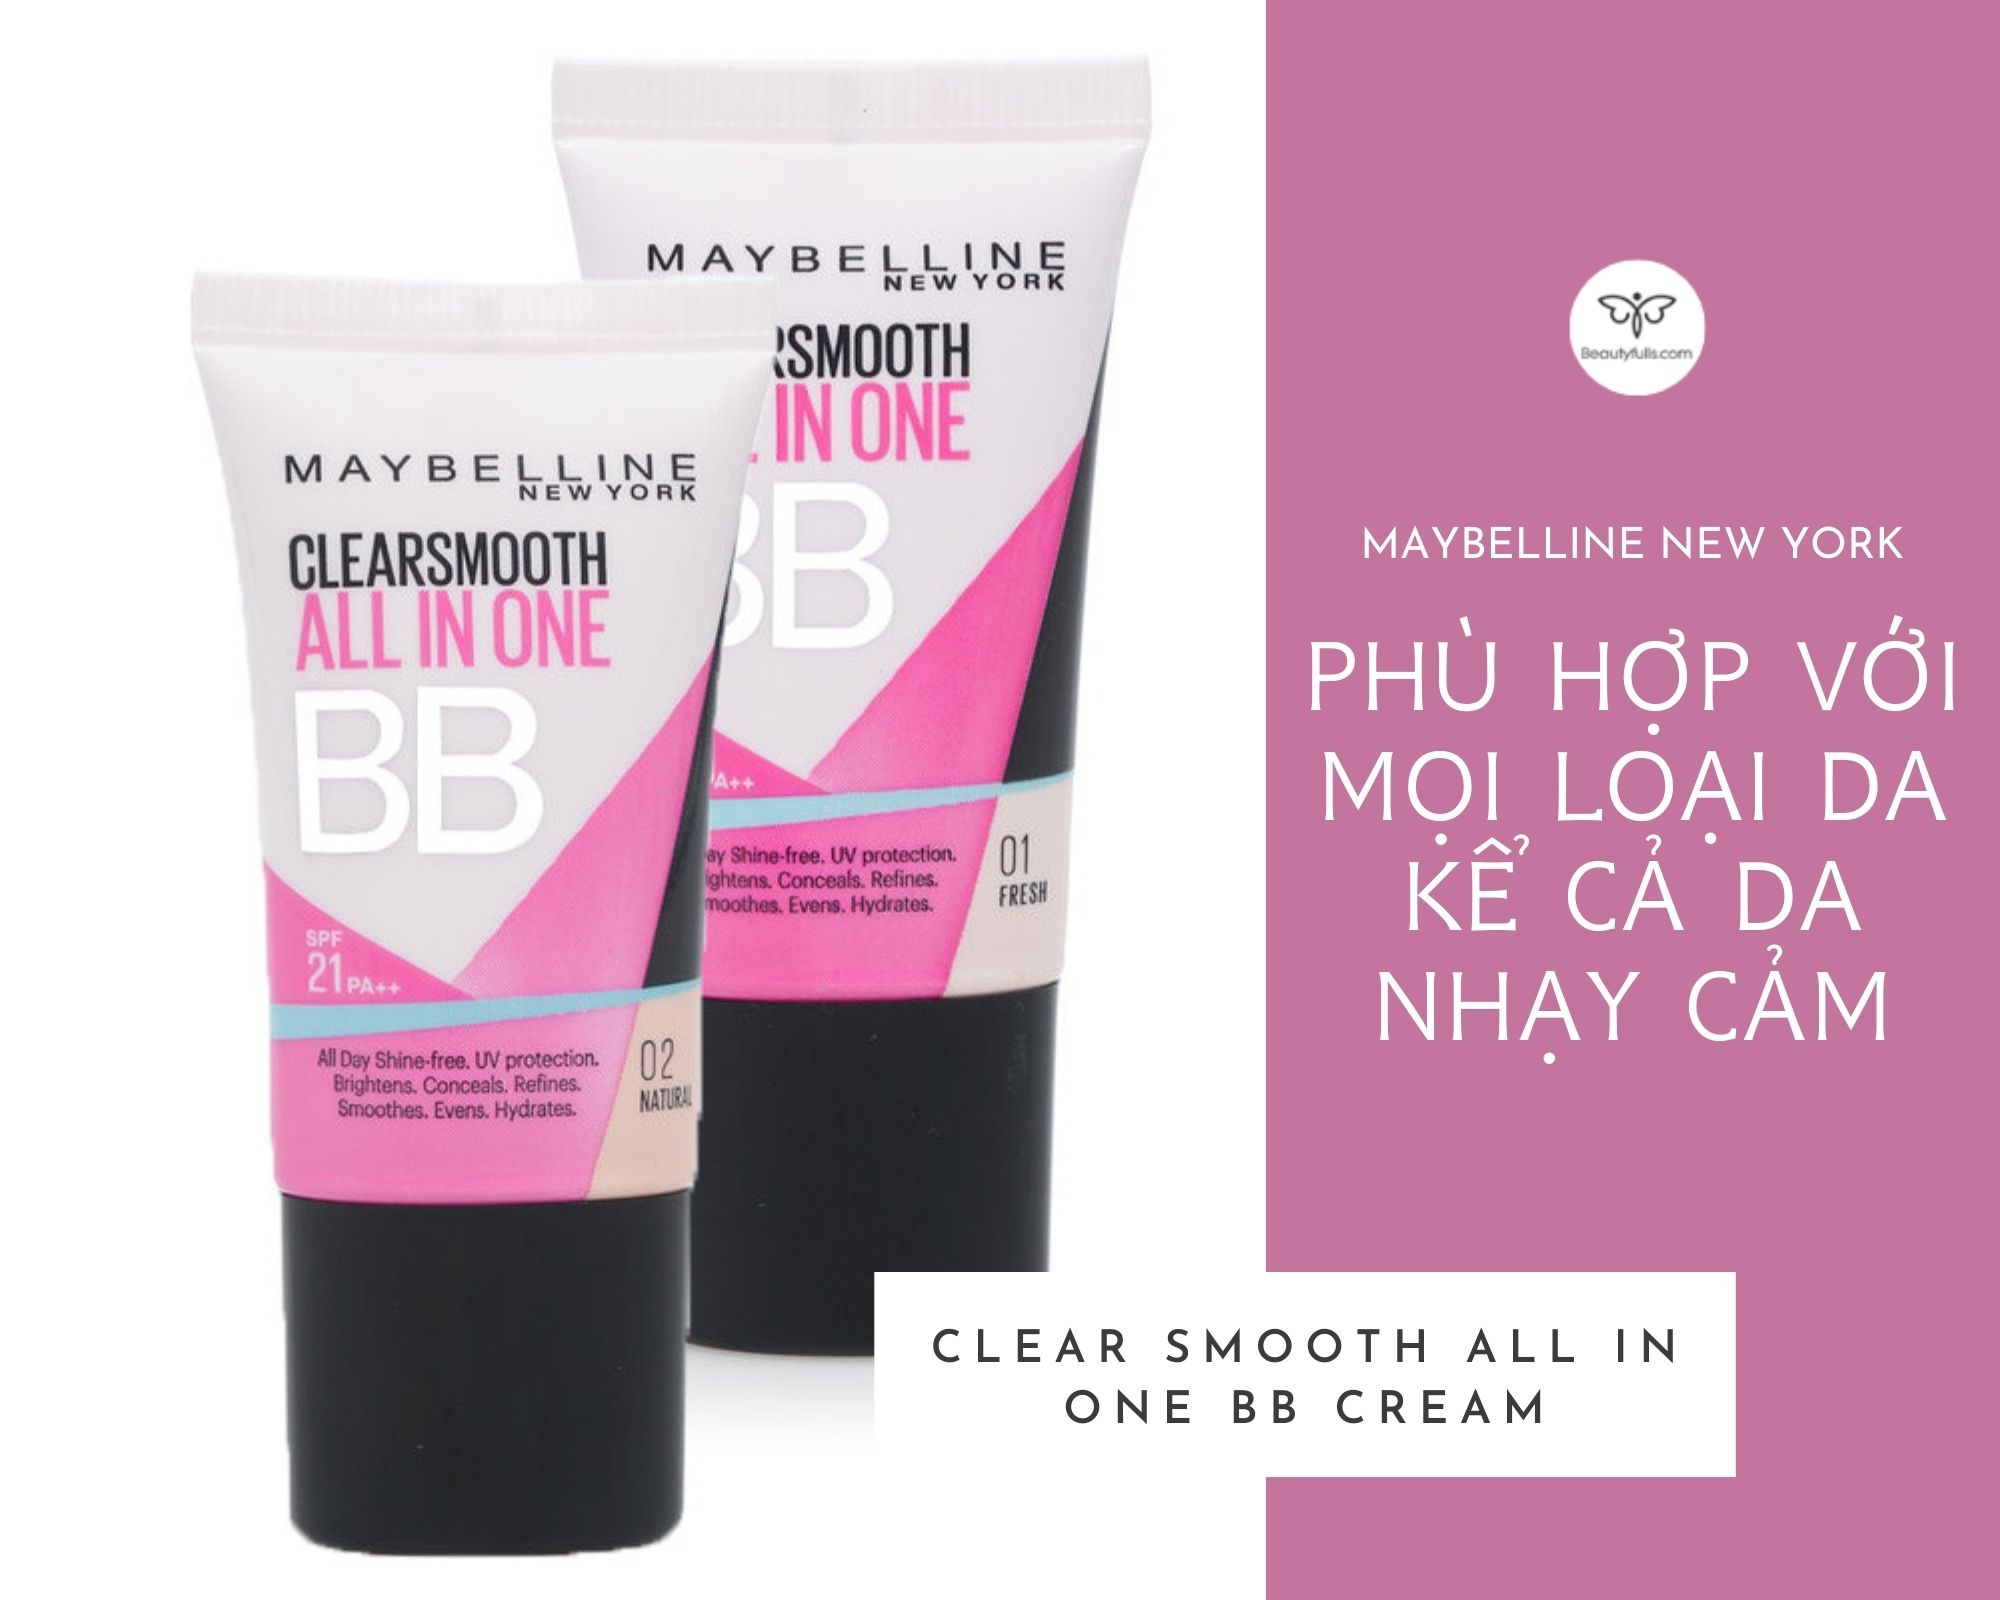 Kem nền Maybelline Clear Smooth BB Cream All in One